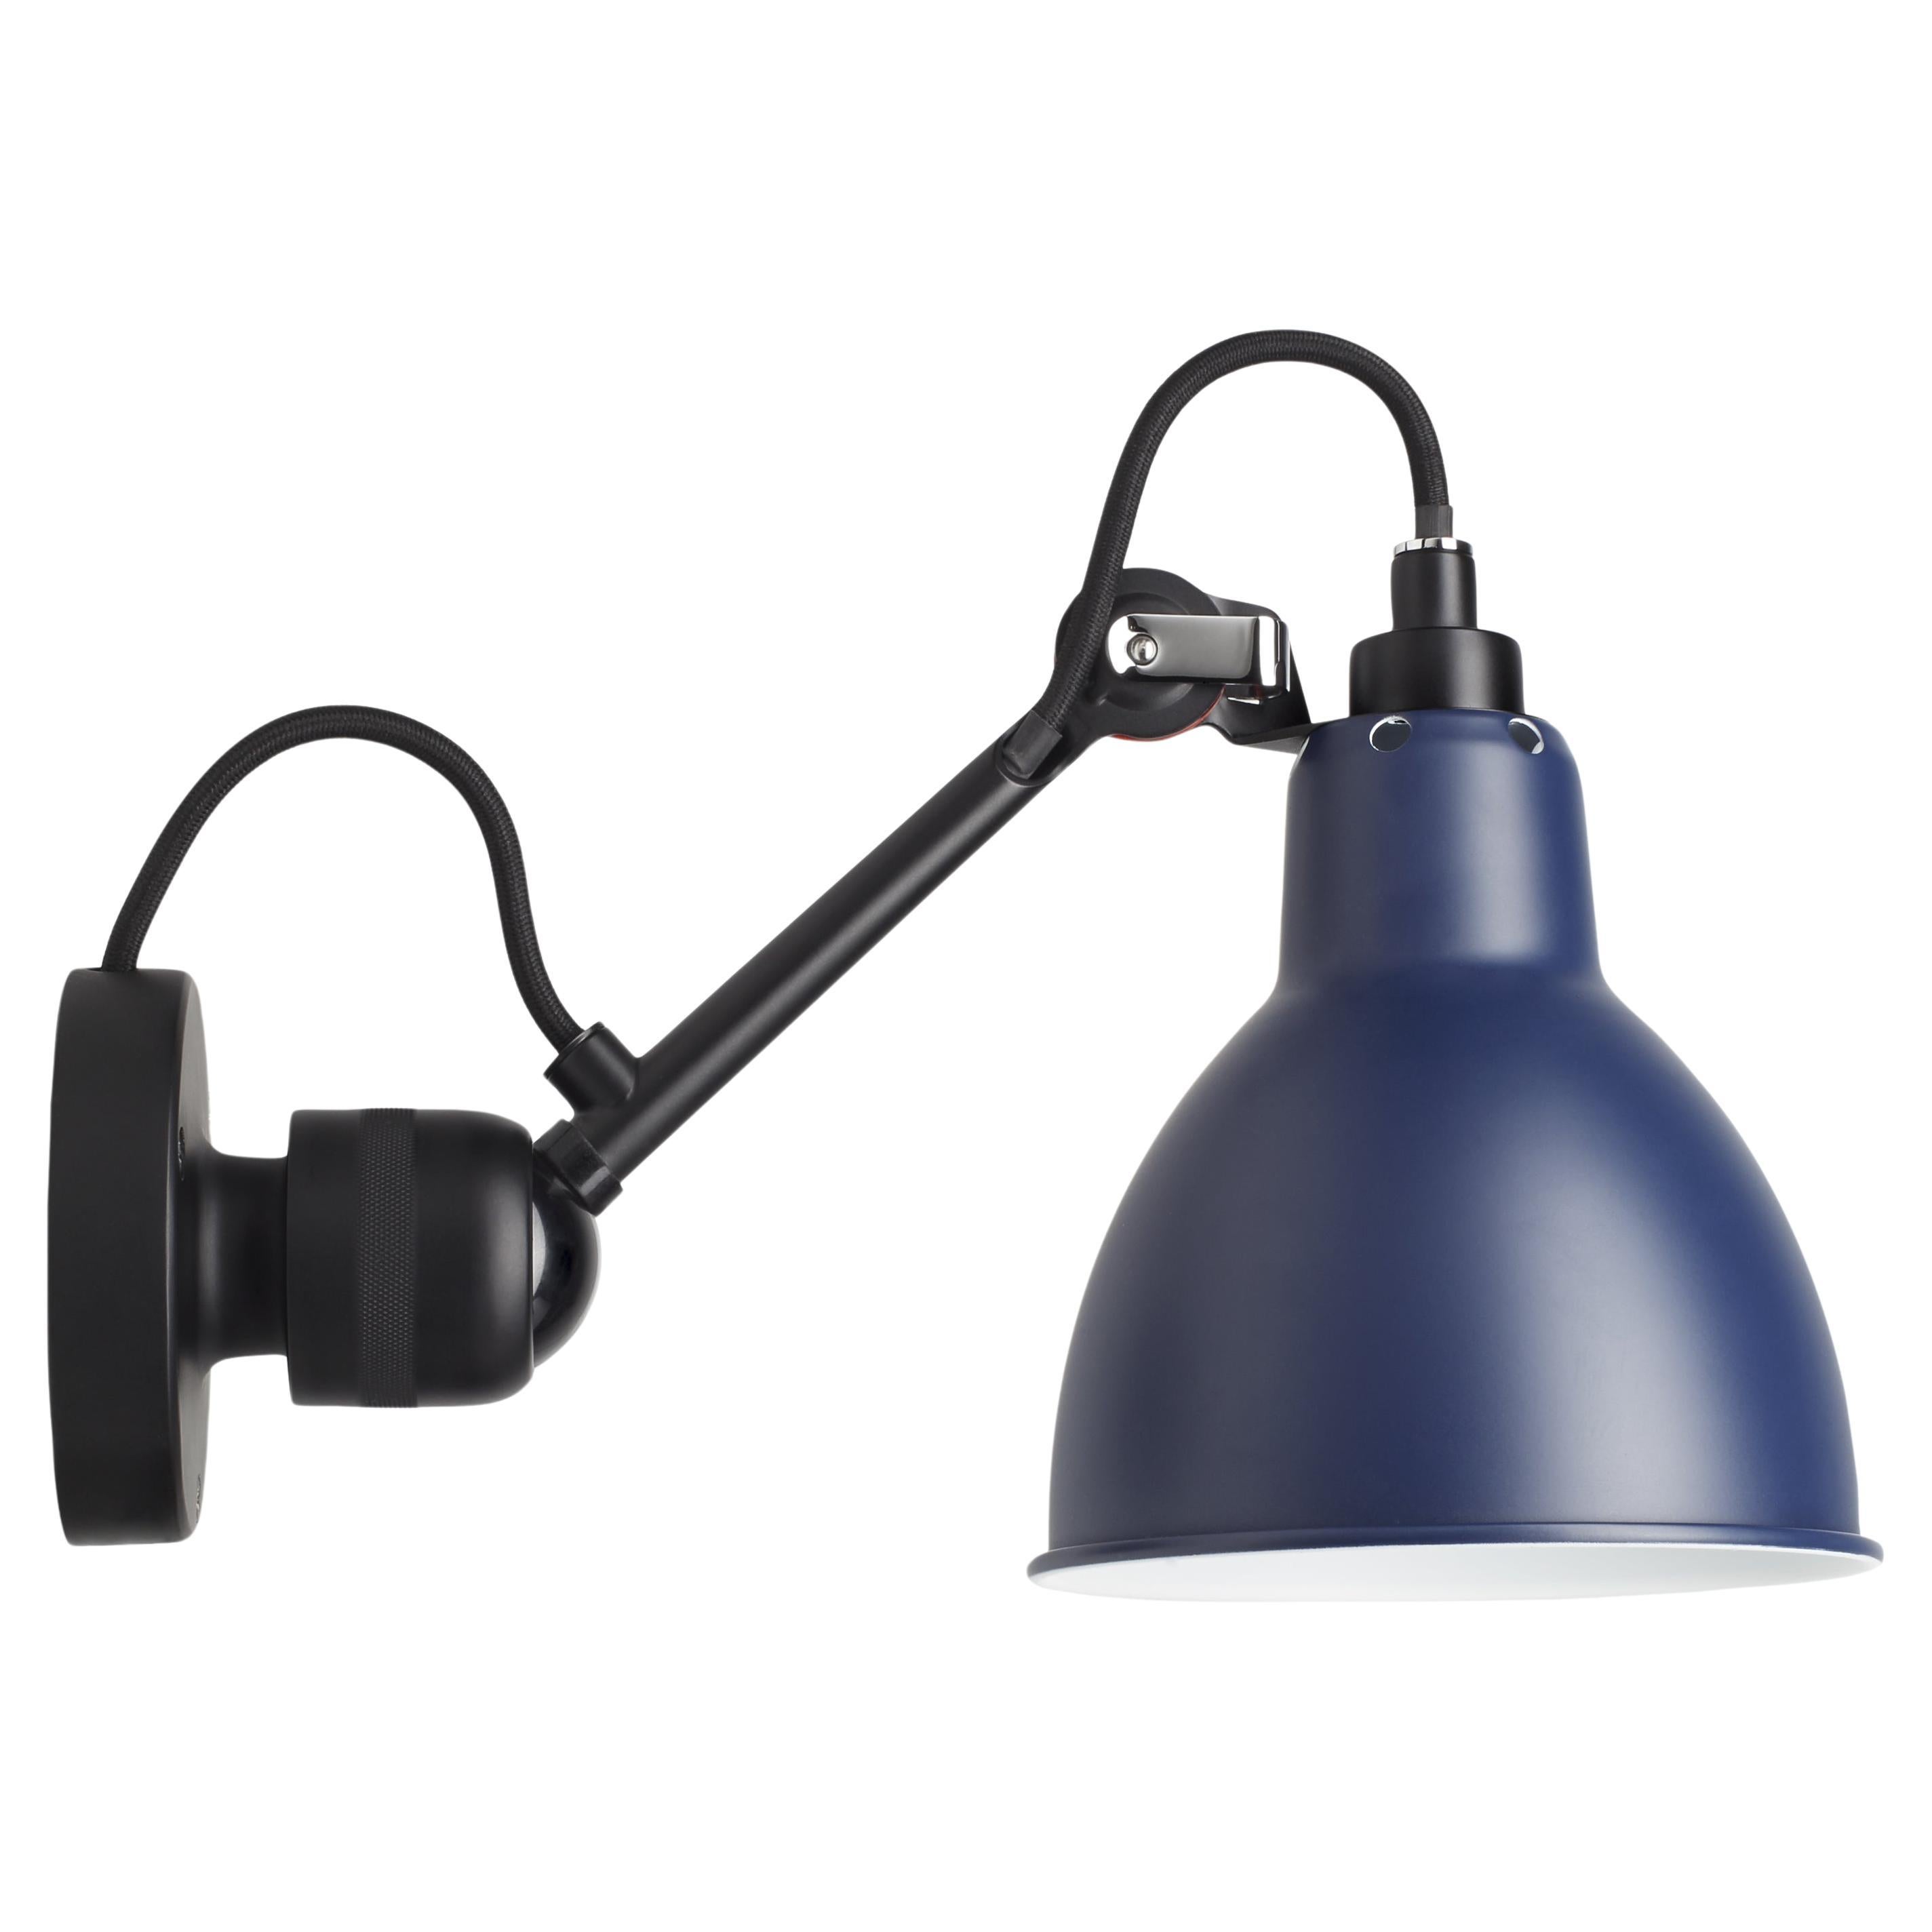 DCW Editions La Lampe Gras N°304 Wall Lamp in Black Arm and Blue Shade For Sale